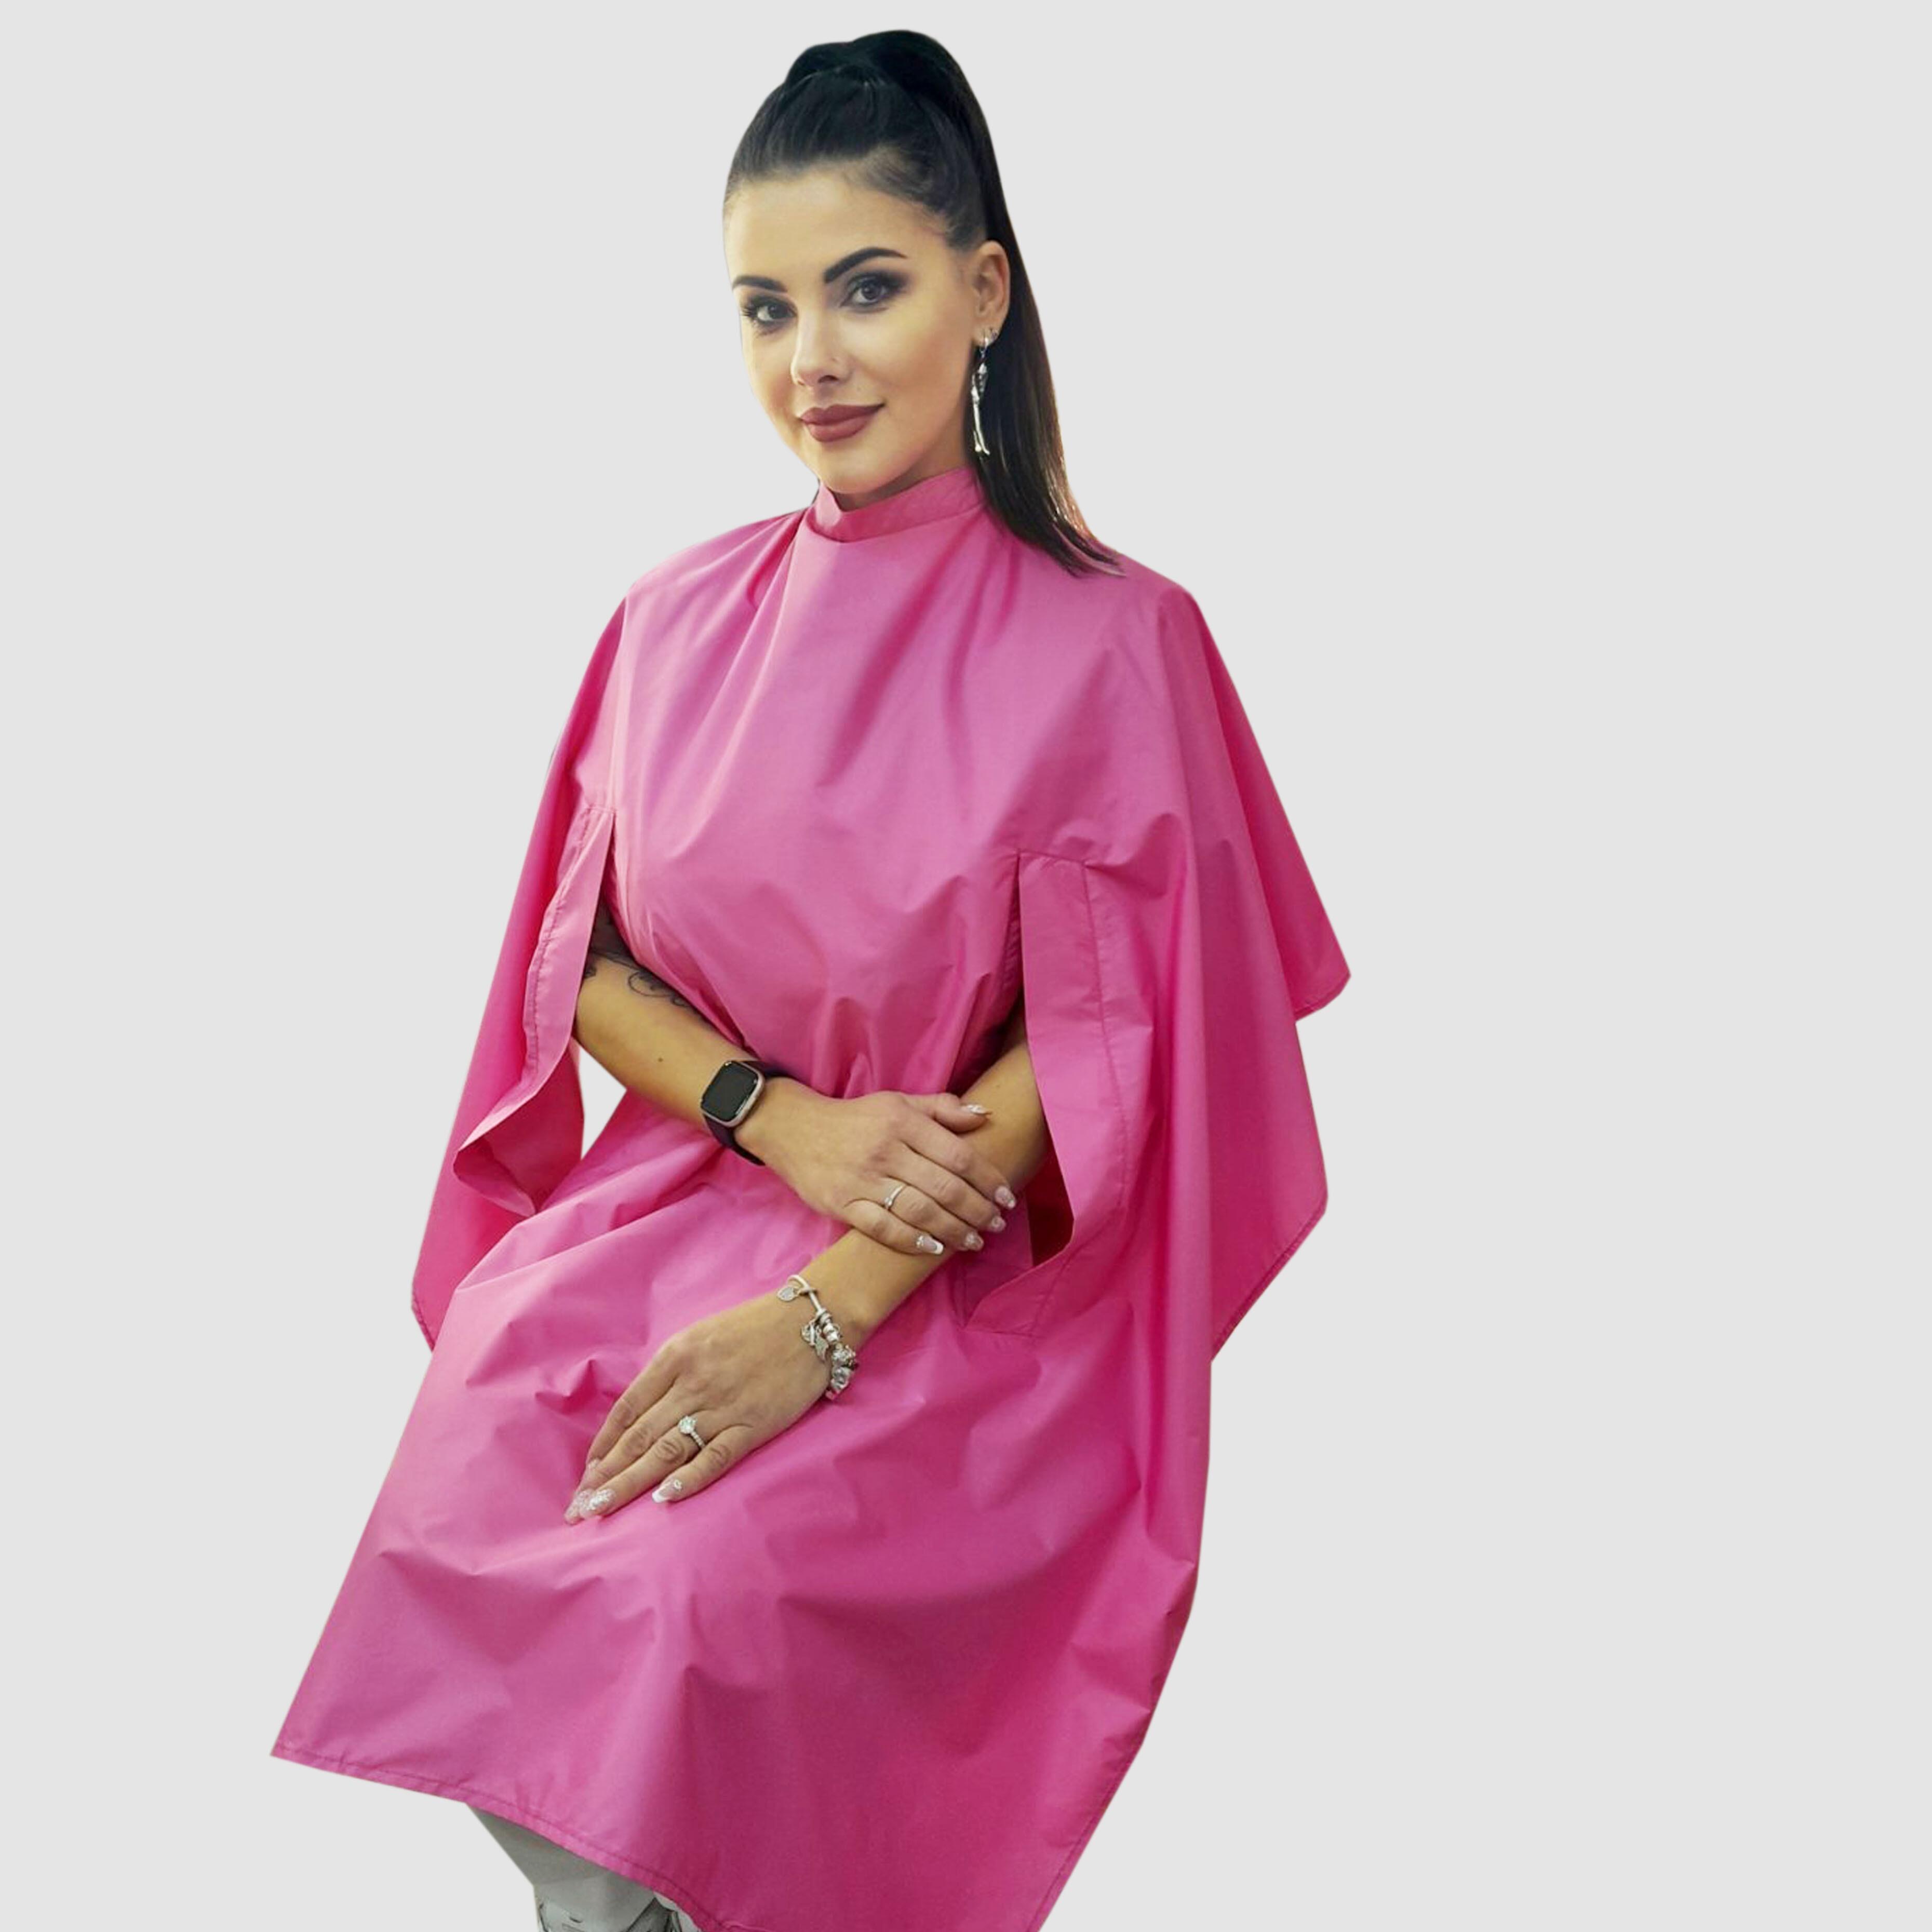 Nibano hairdressing gown with handsplits & poppers Pink Barbie